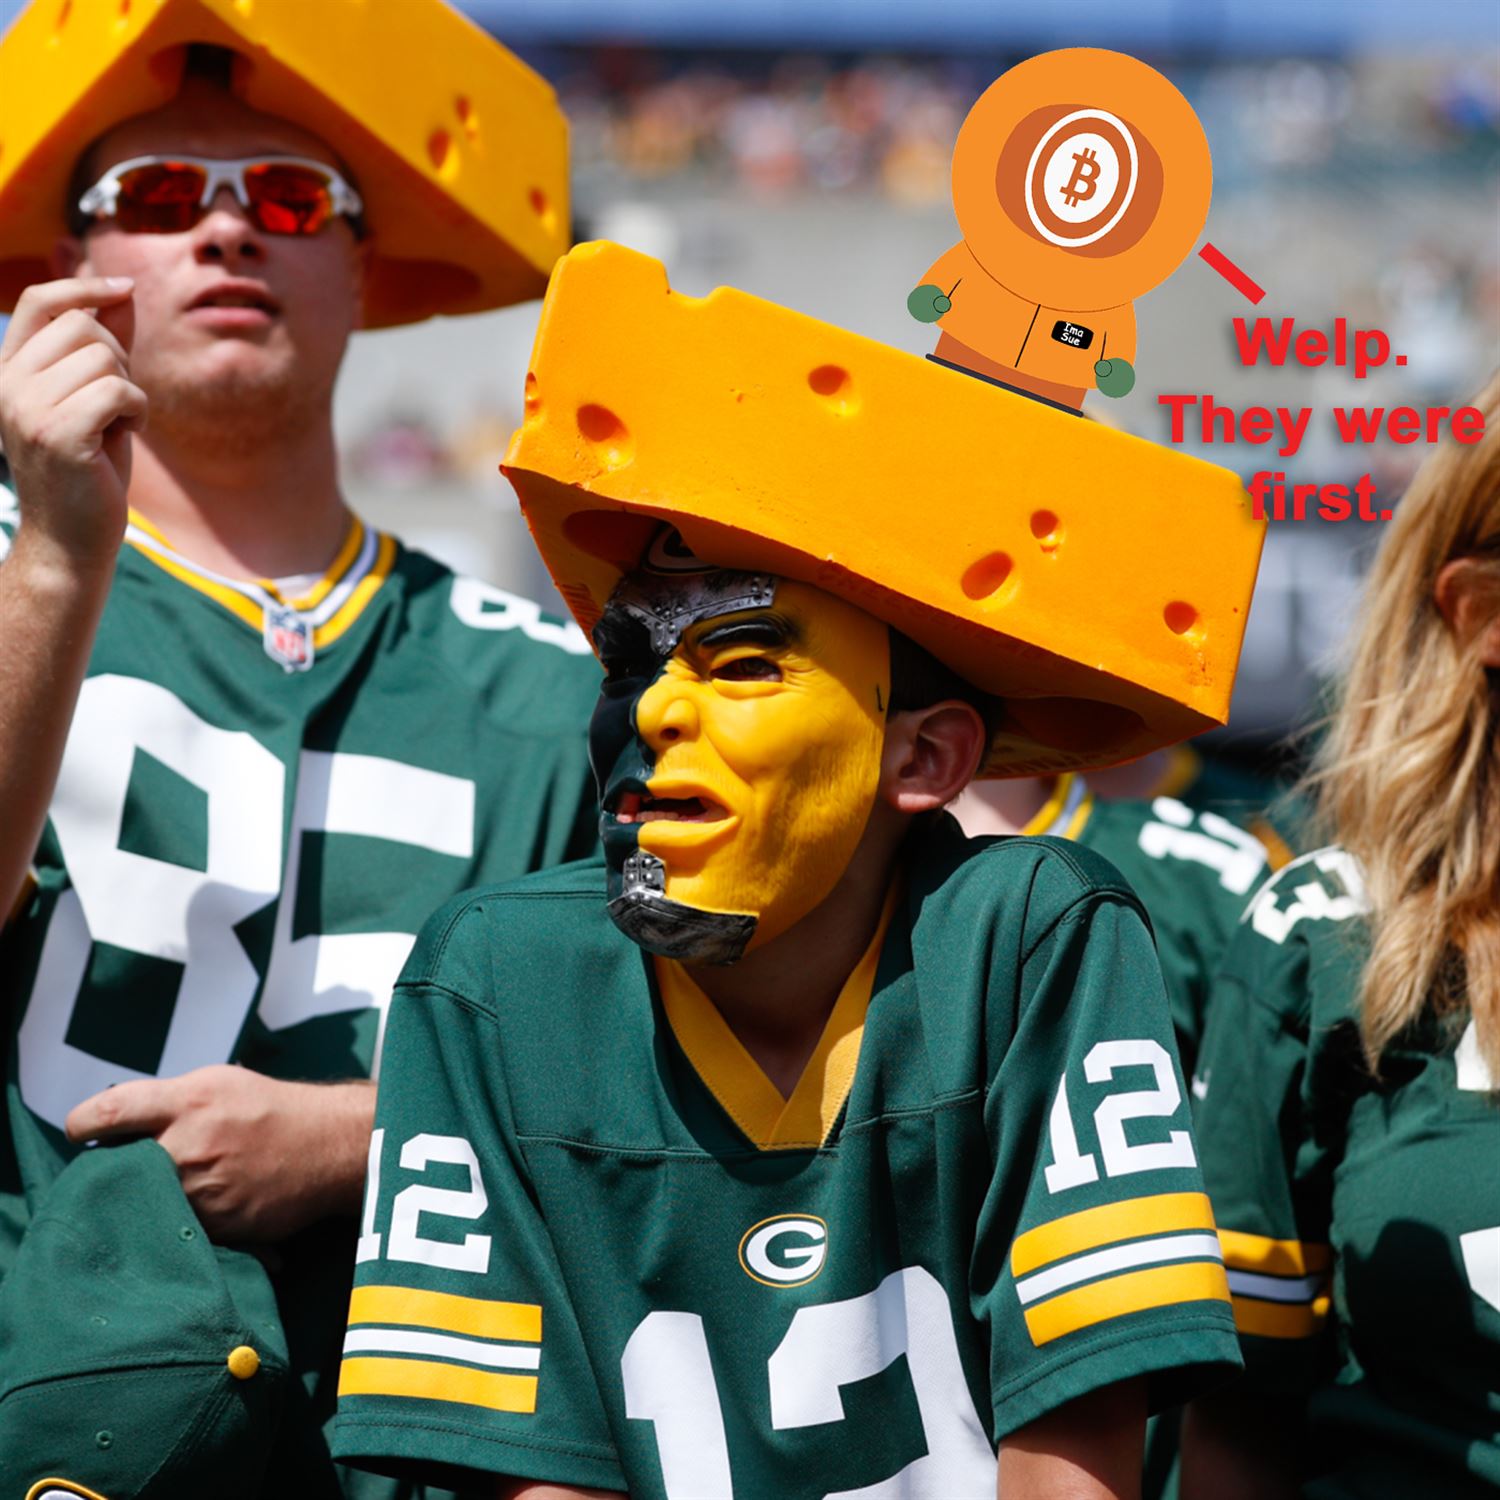 Cheese Heads Are First